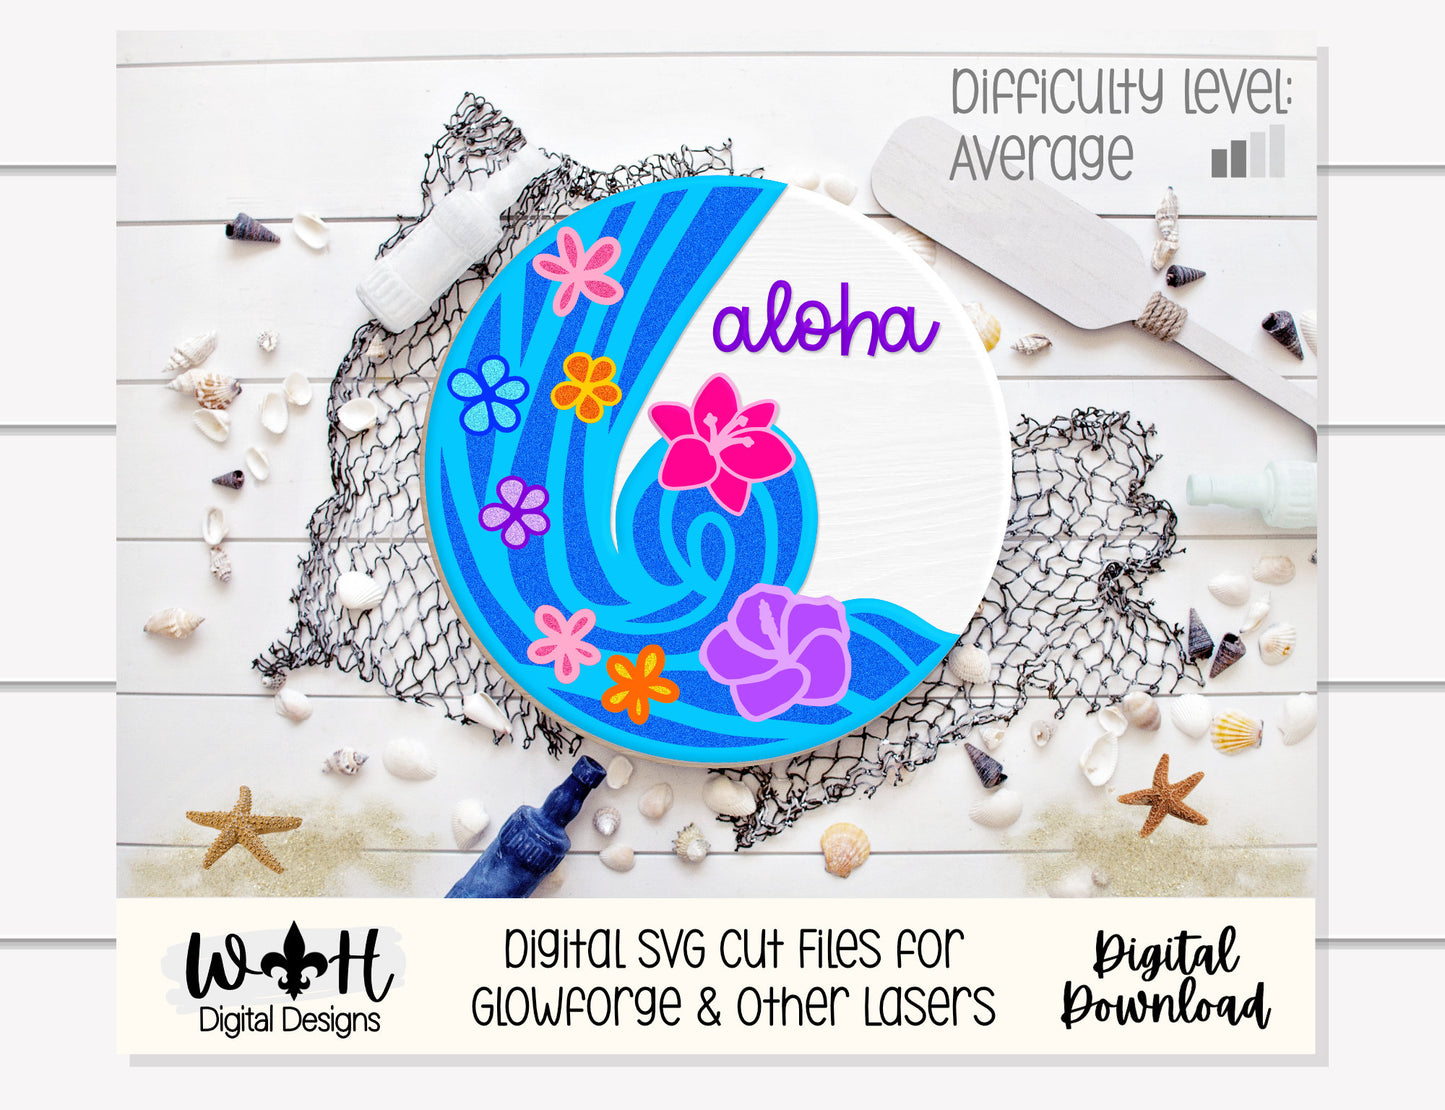 Aloha Waterfall Door Hanger Round - Summer Floral Sign Making and DIY Kits - Single Line Cut File For Glowforge Laser - Digital SVG File